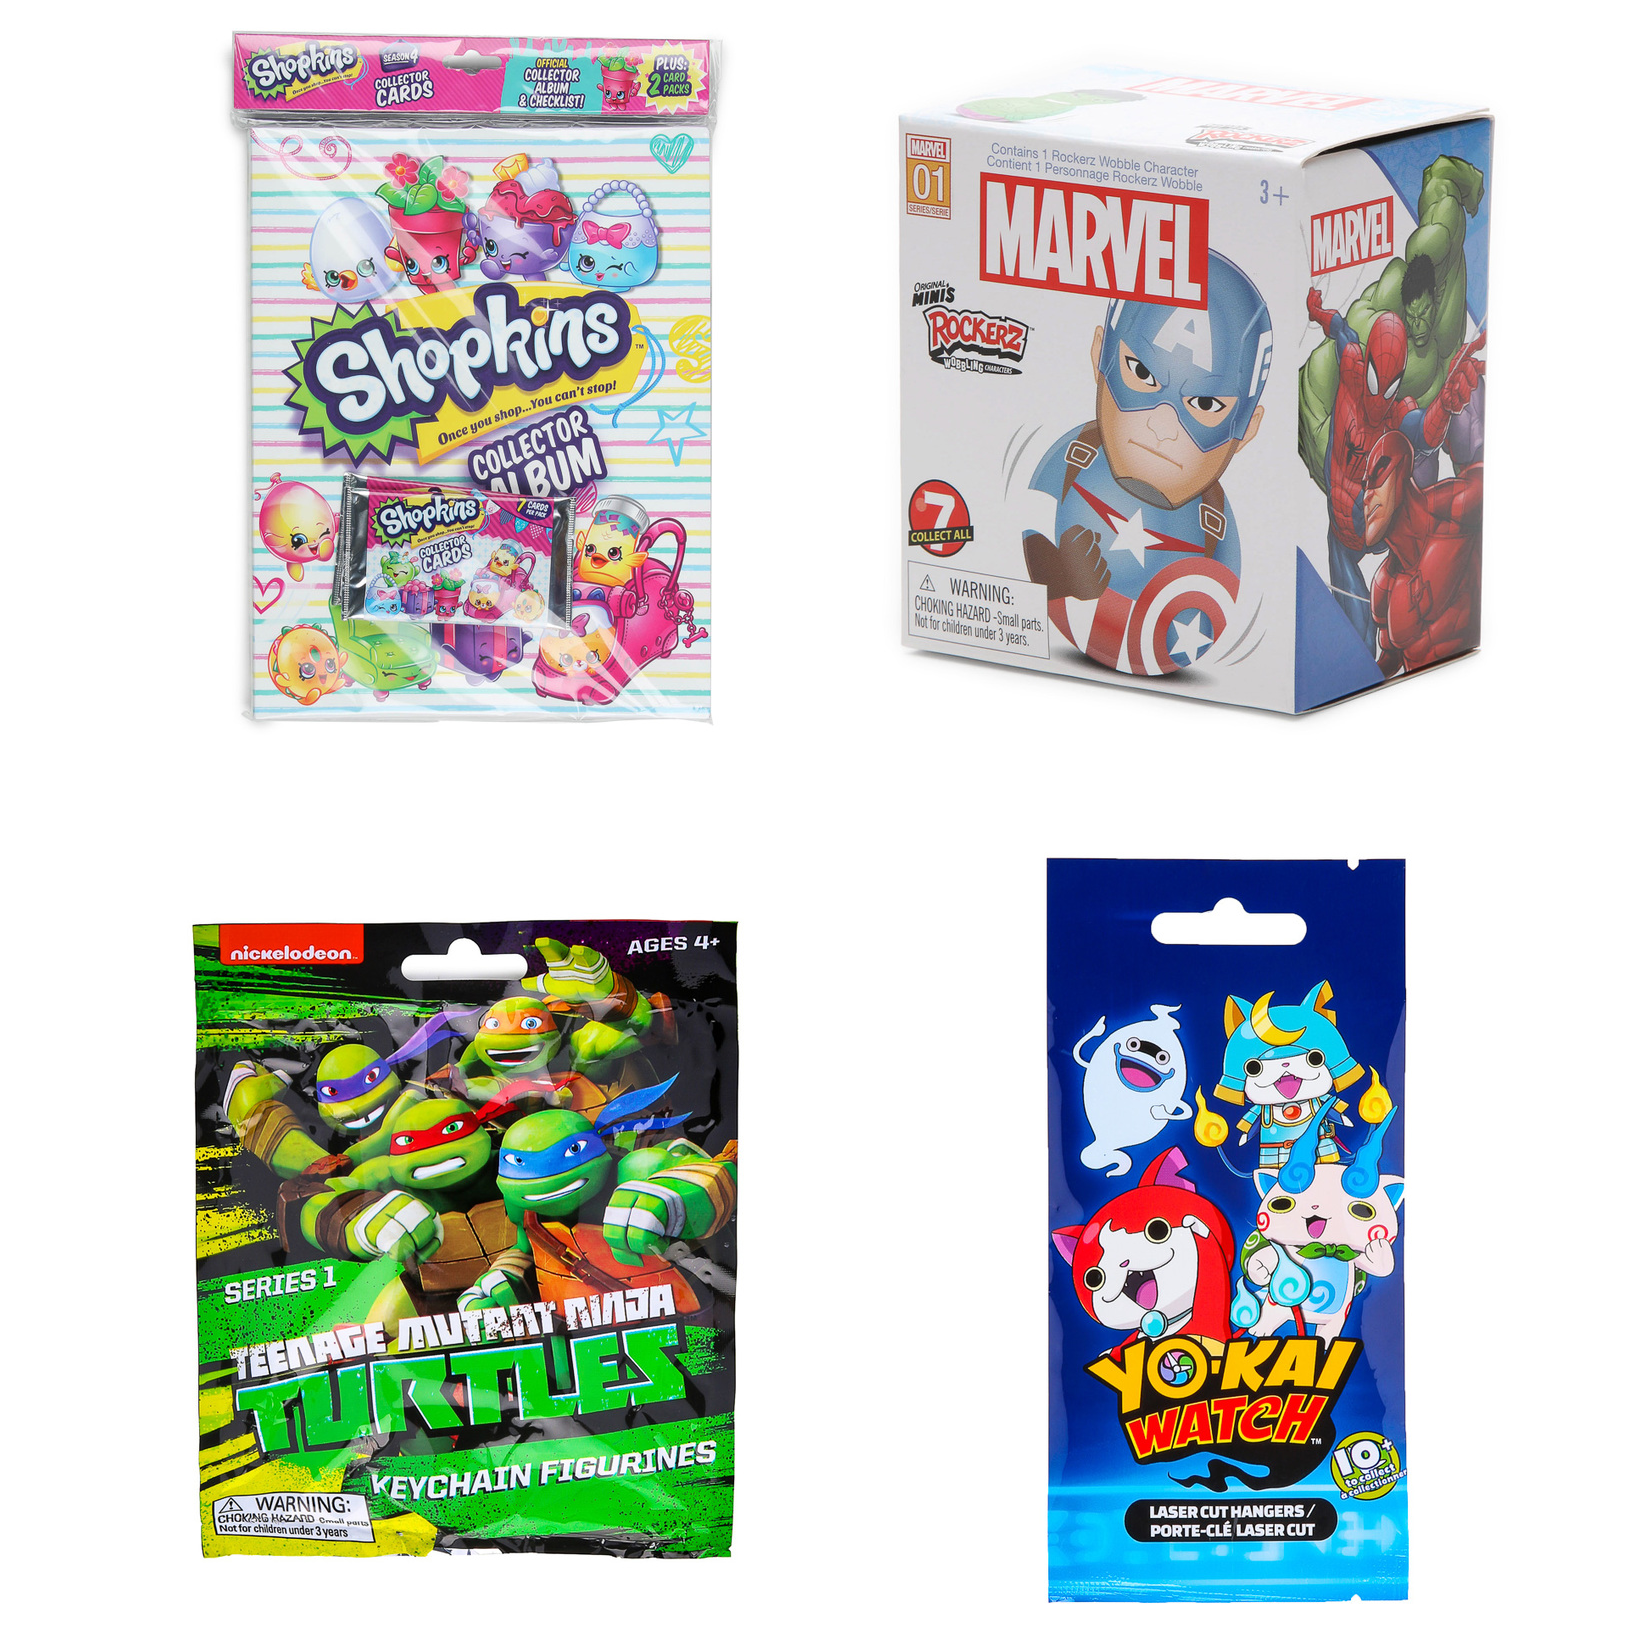 Blind Bag Toys Starting at $2.00 on Hollar! PERFECT Stocking Stuffers!